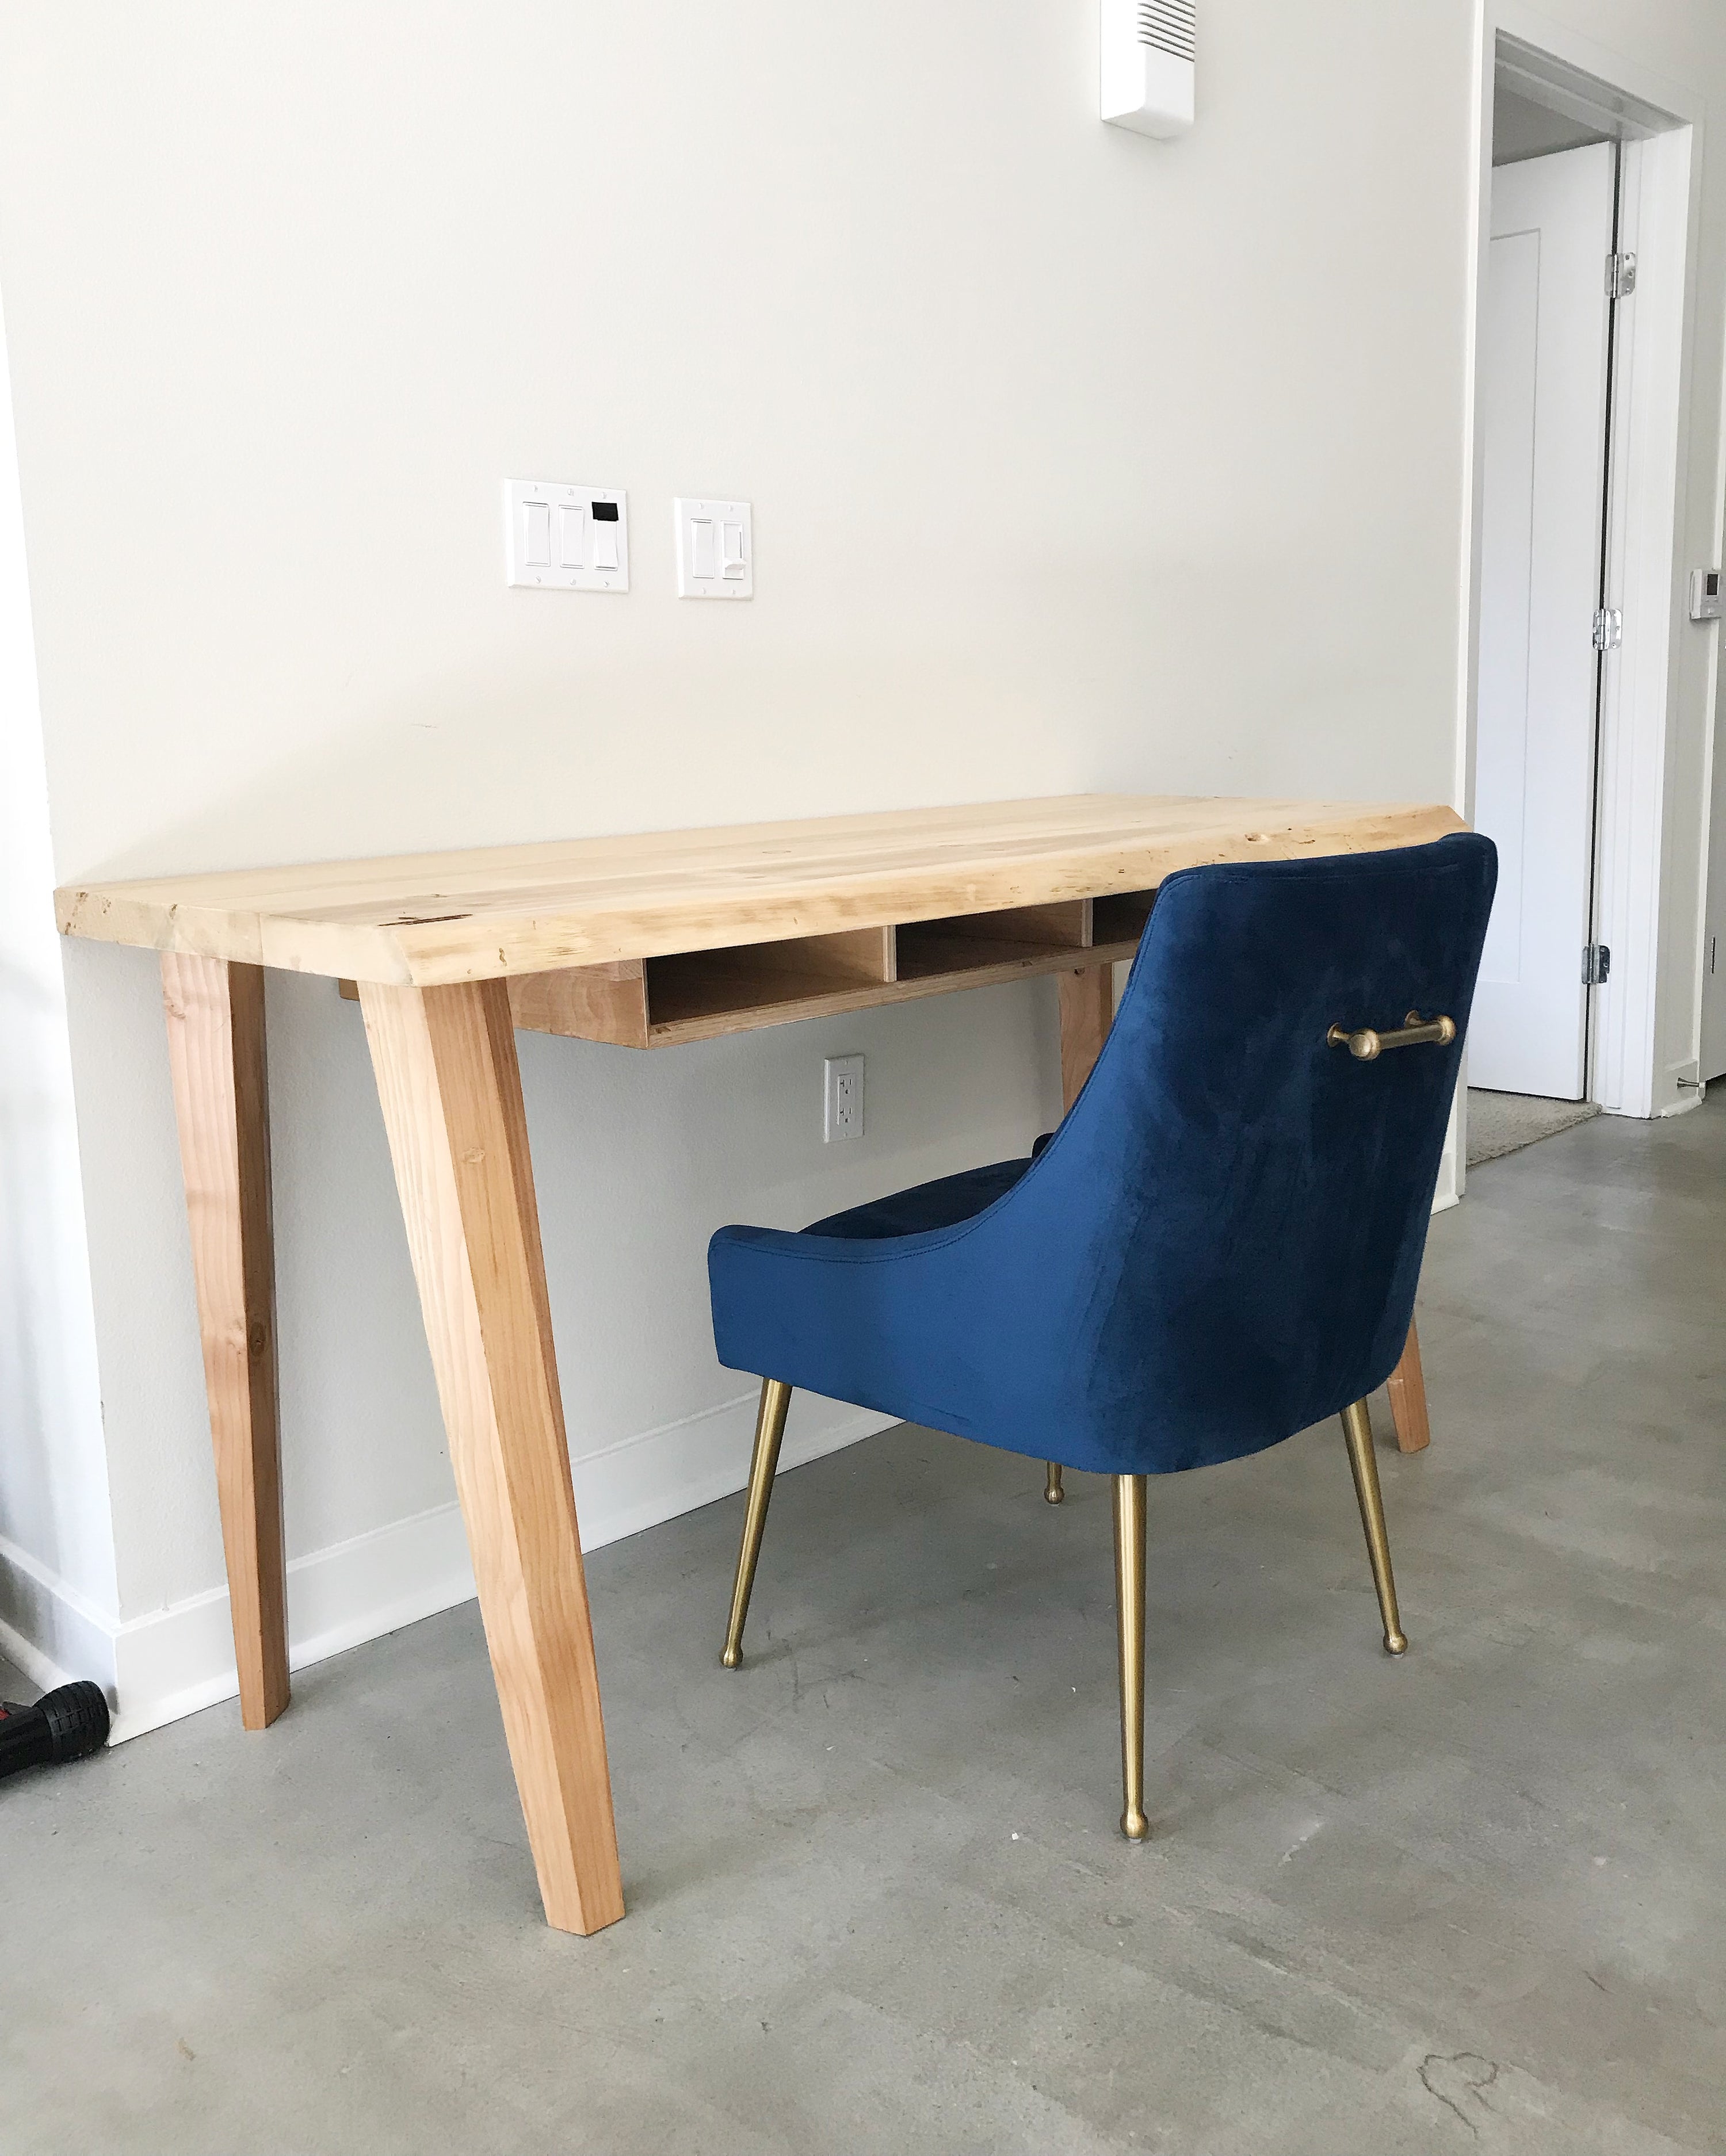 Decorate your office with our custom made desks